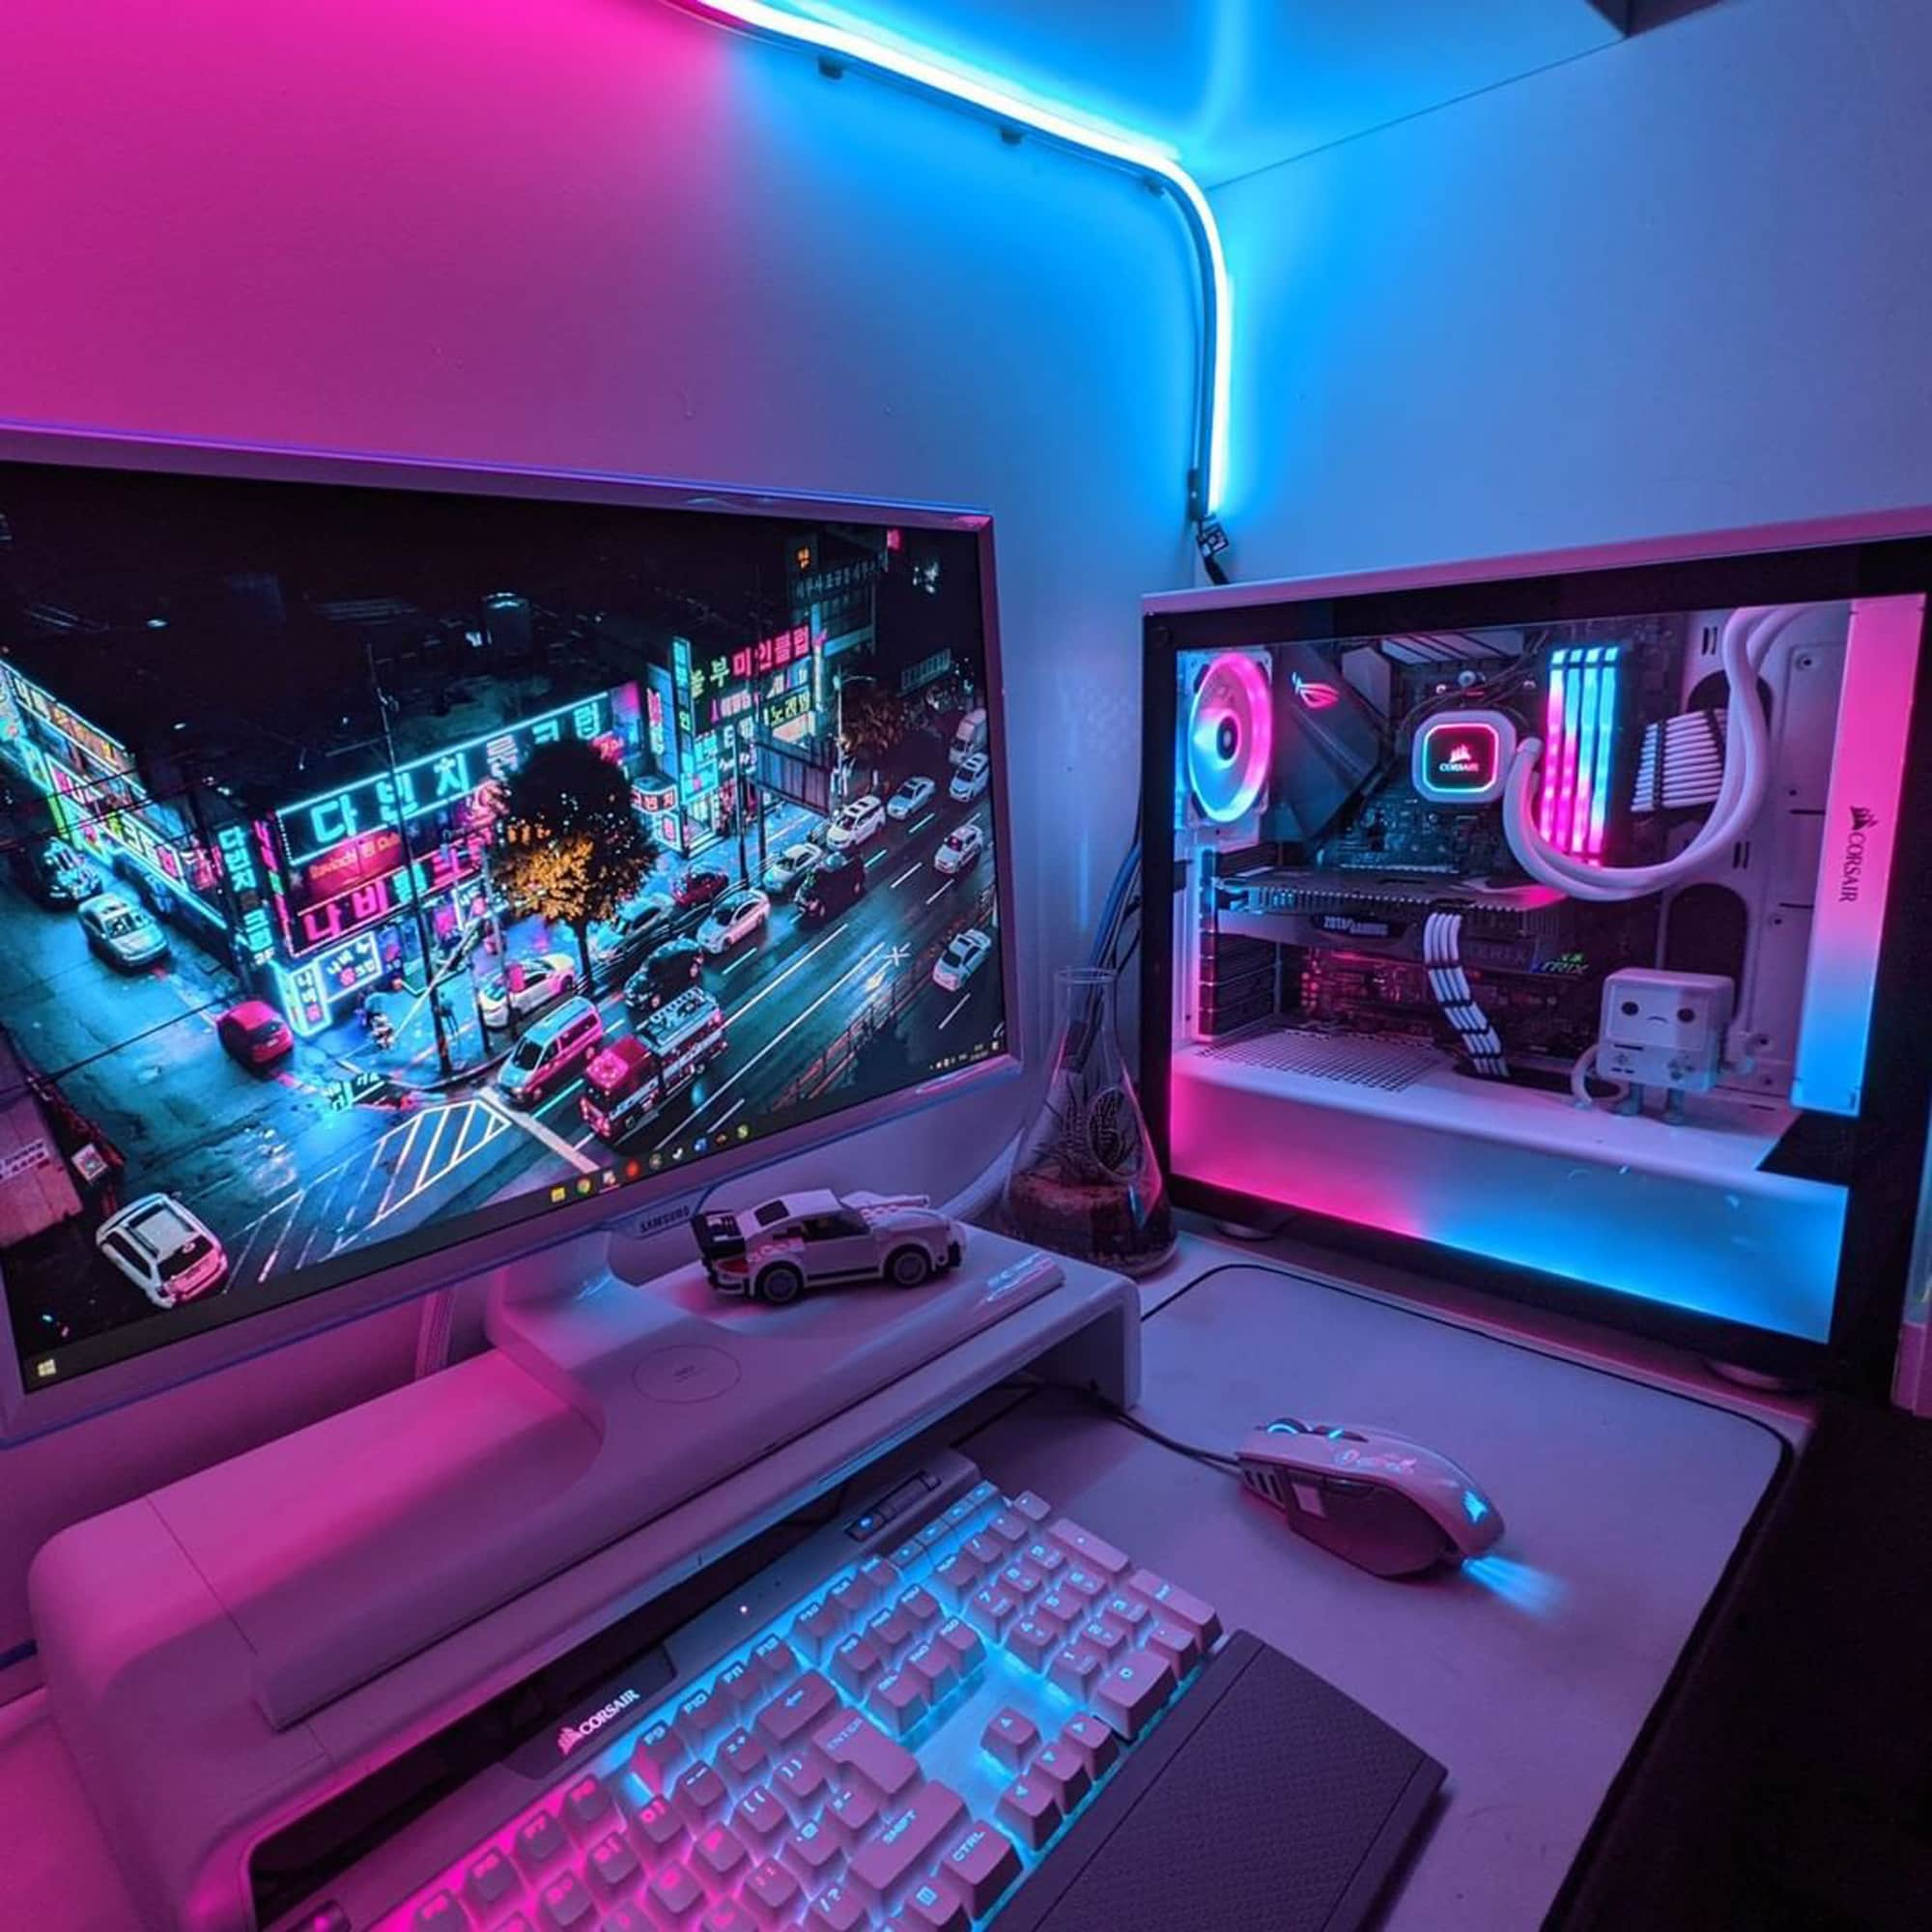 The Simple Delight of Having RGB Lights in Your PC - POPSUGAR